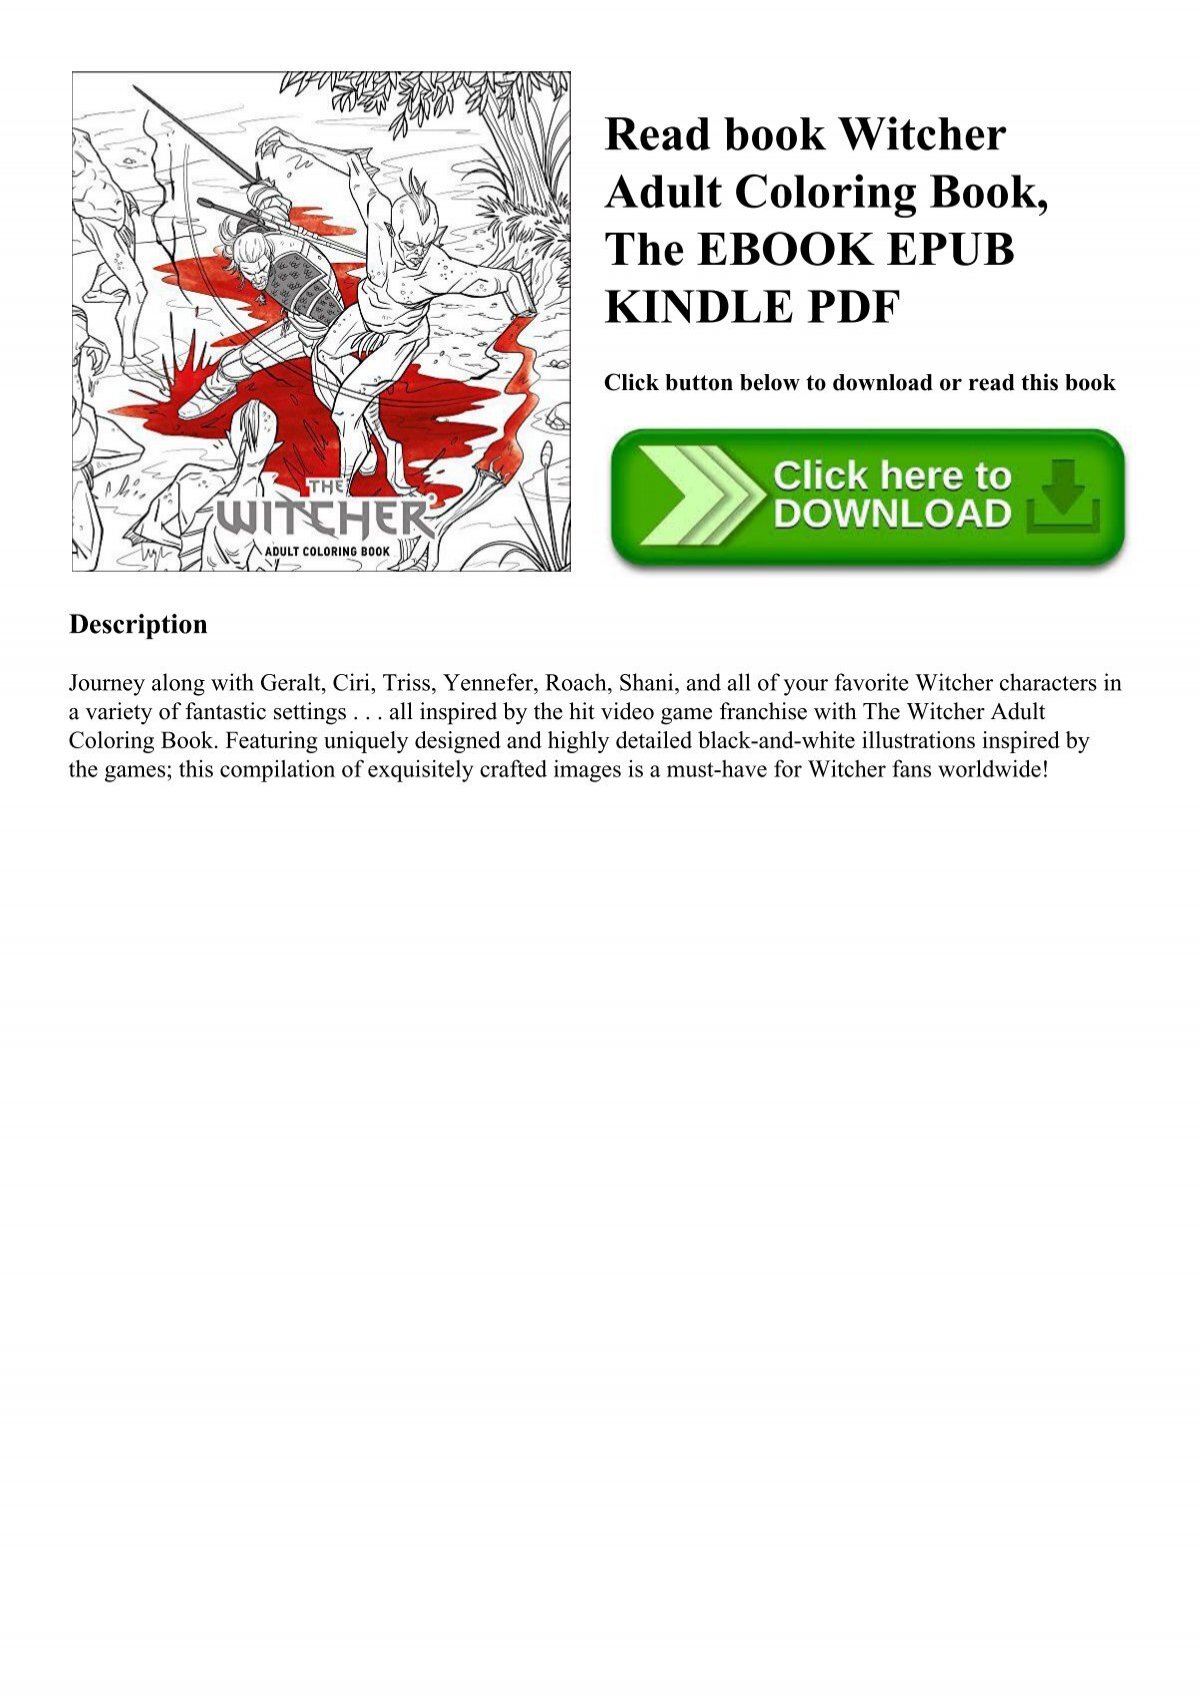 Download Read Book Witcher Adult Coloring Book The Ebook Epub Kindle Pdf